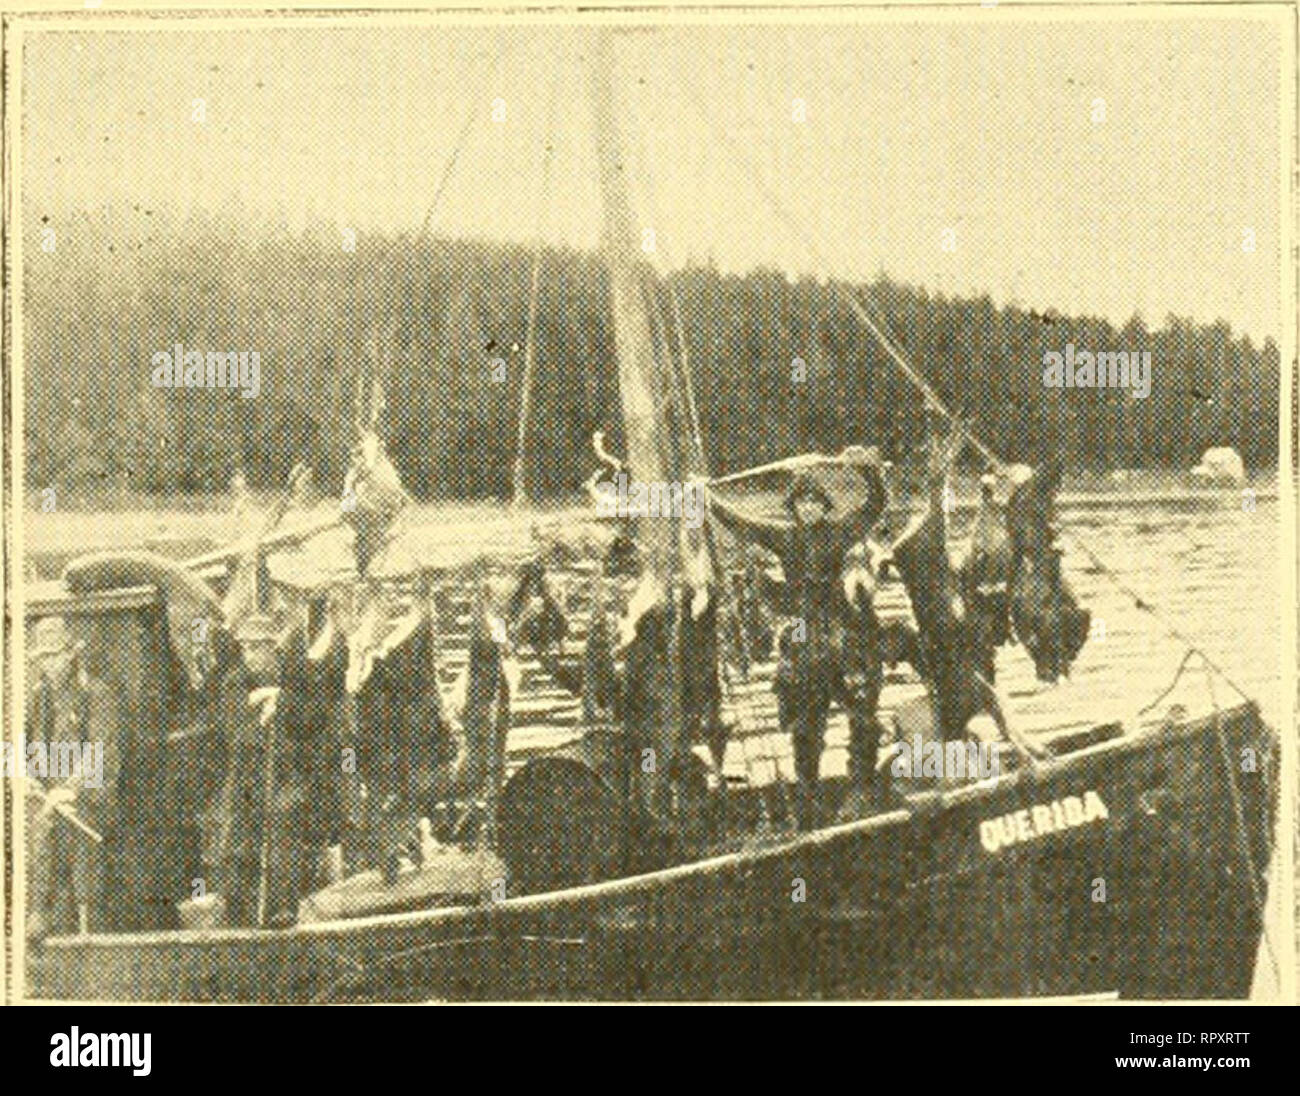 . The Alaska salmon and their practical propagation. Salmon fisheries. Page Nine before the hatching stage of the eggs would | be reached. Observations on July 6. 1920, from this plant of eggs were made. There was located, and seen throughout the lake and its tundra and tributary inlet streams, u schools of thousands, young salmon ofi an average length of three and one half| inches, in vigorous and healthy condition, and not like the hand reared, domesticated fish, robbed of the instinct of self preserva- tion. One can realize that the cost of maintaining and feeding these fish up to this siz Stock Photo